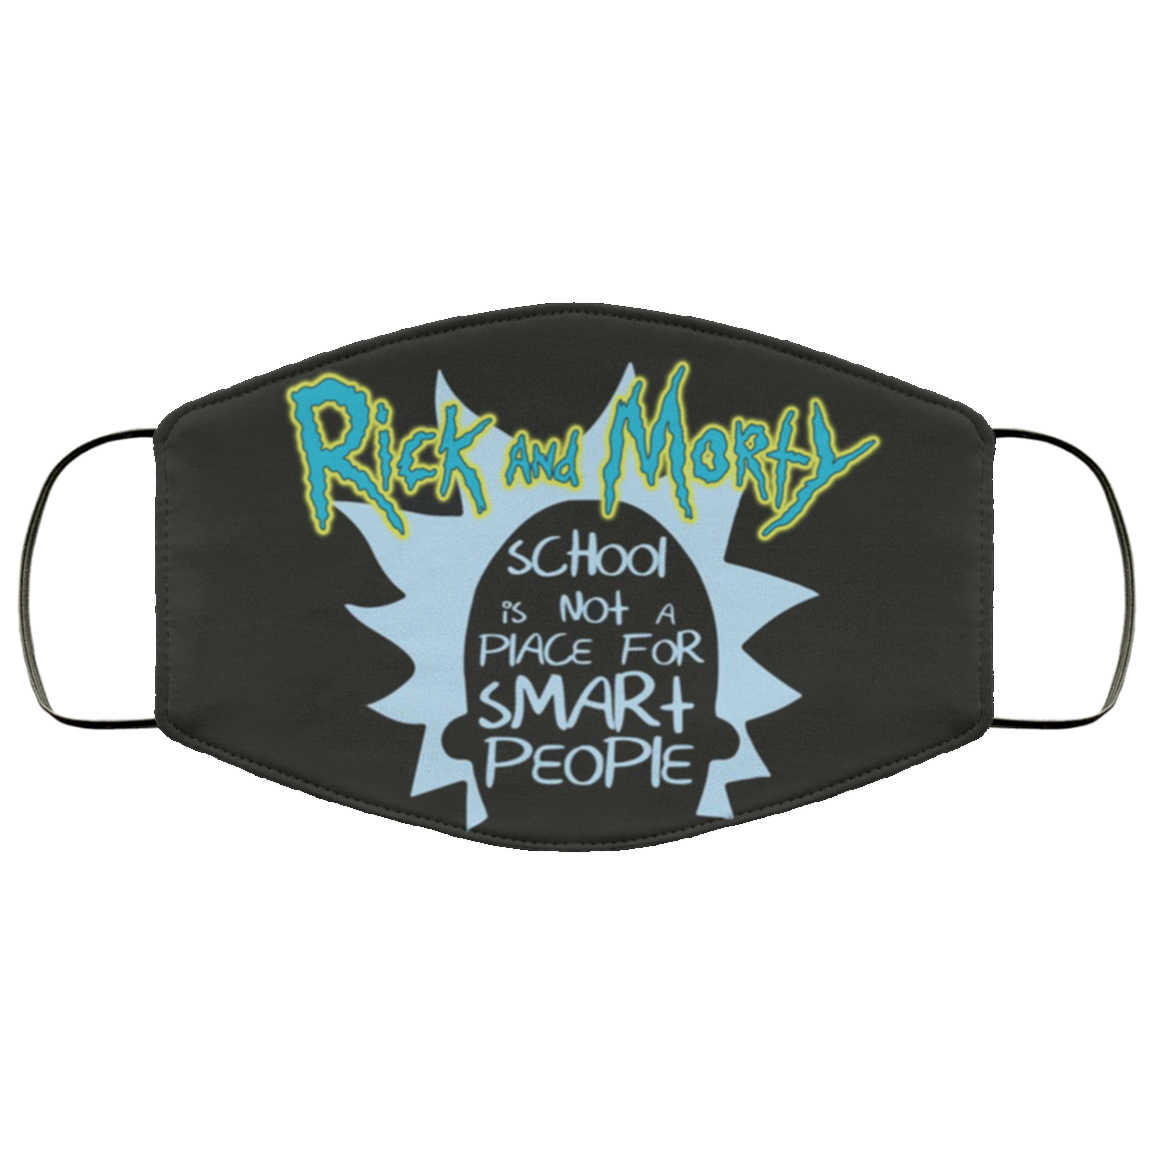 Rick And Morty School Is Not A Place For Smart People Face Mask